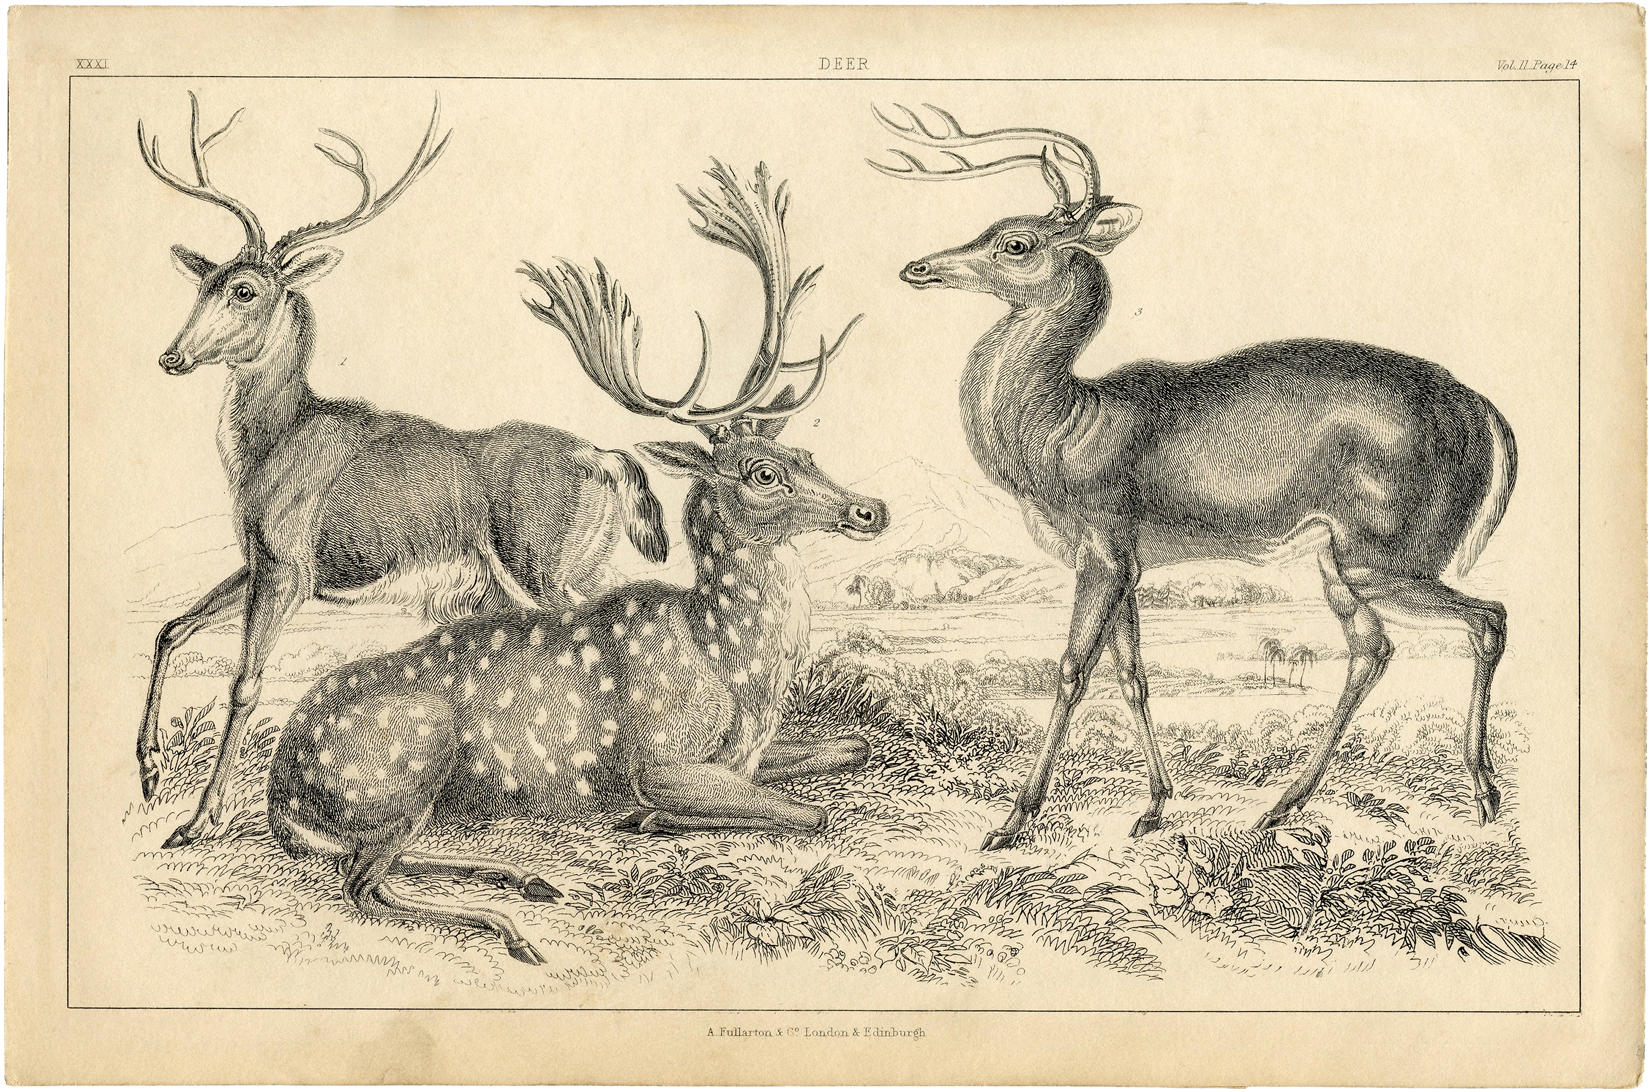 Free Deer Printable - Natural History - The Graphics Fairy